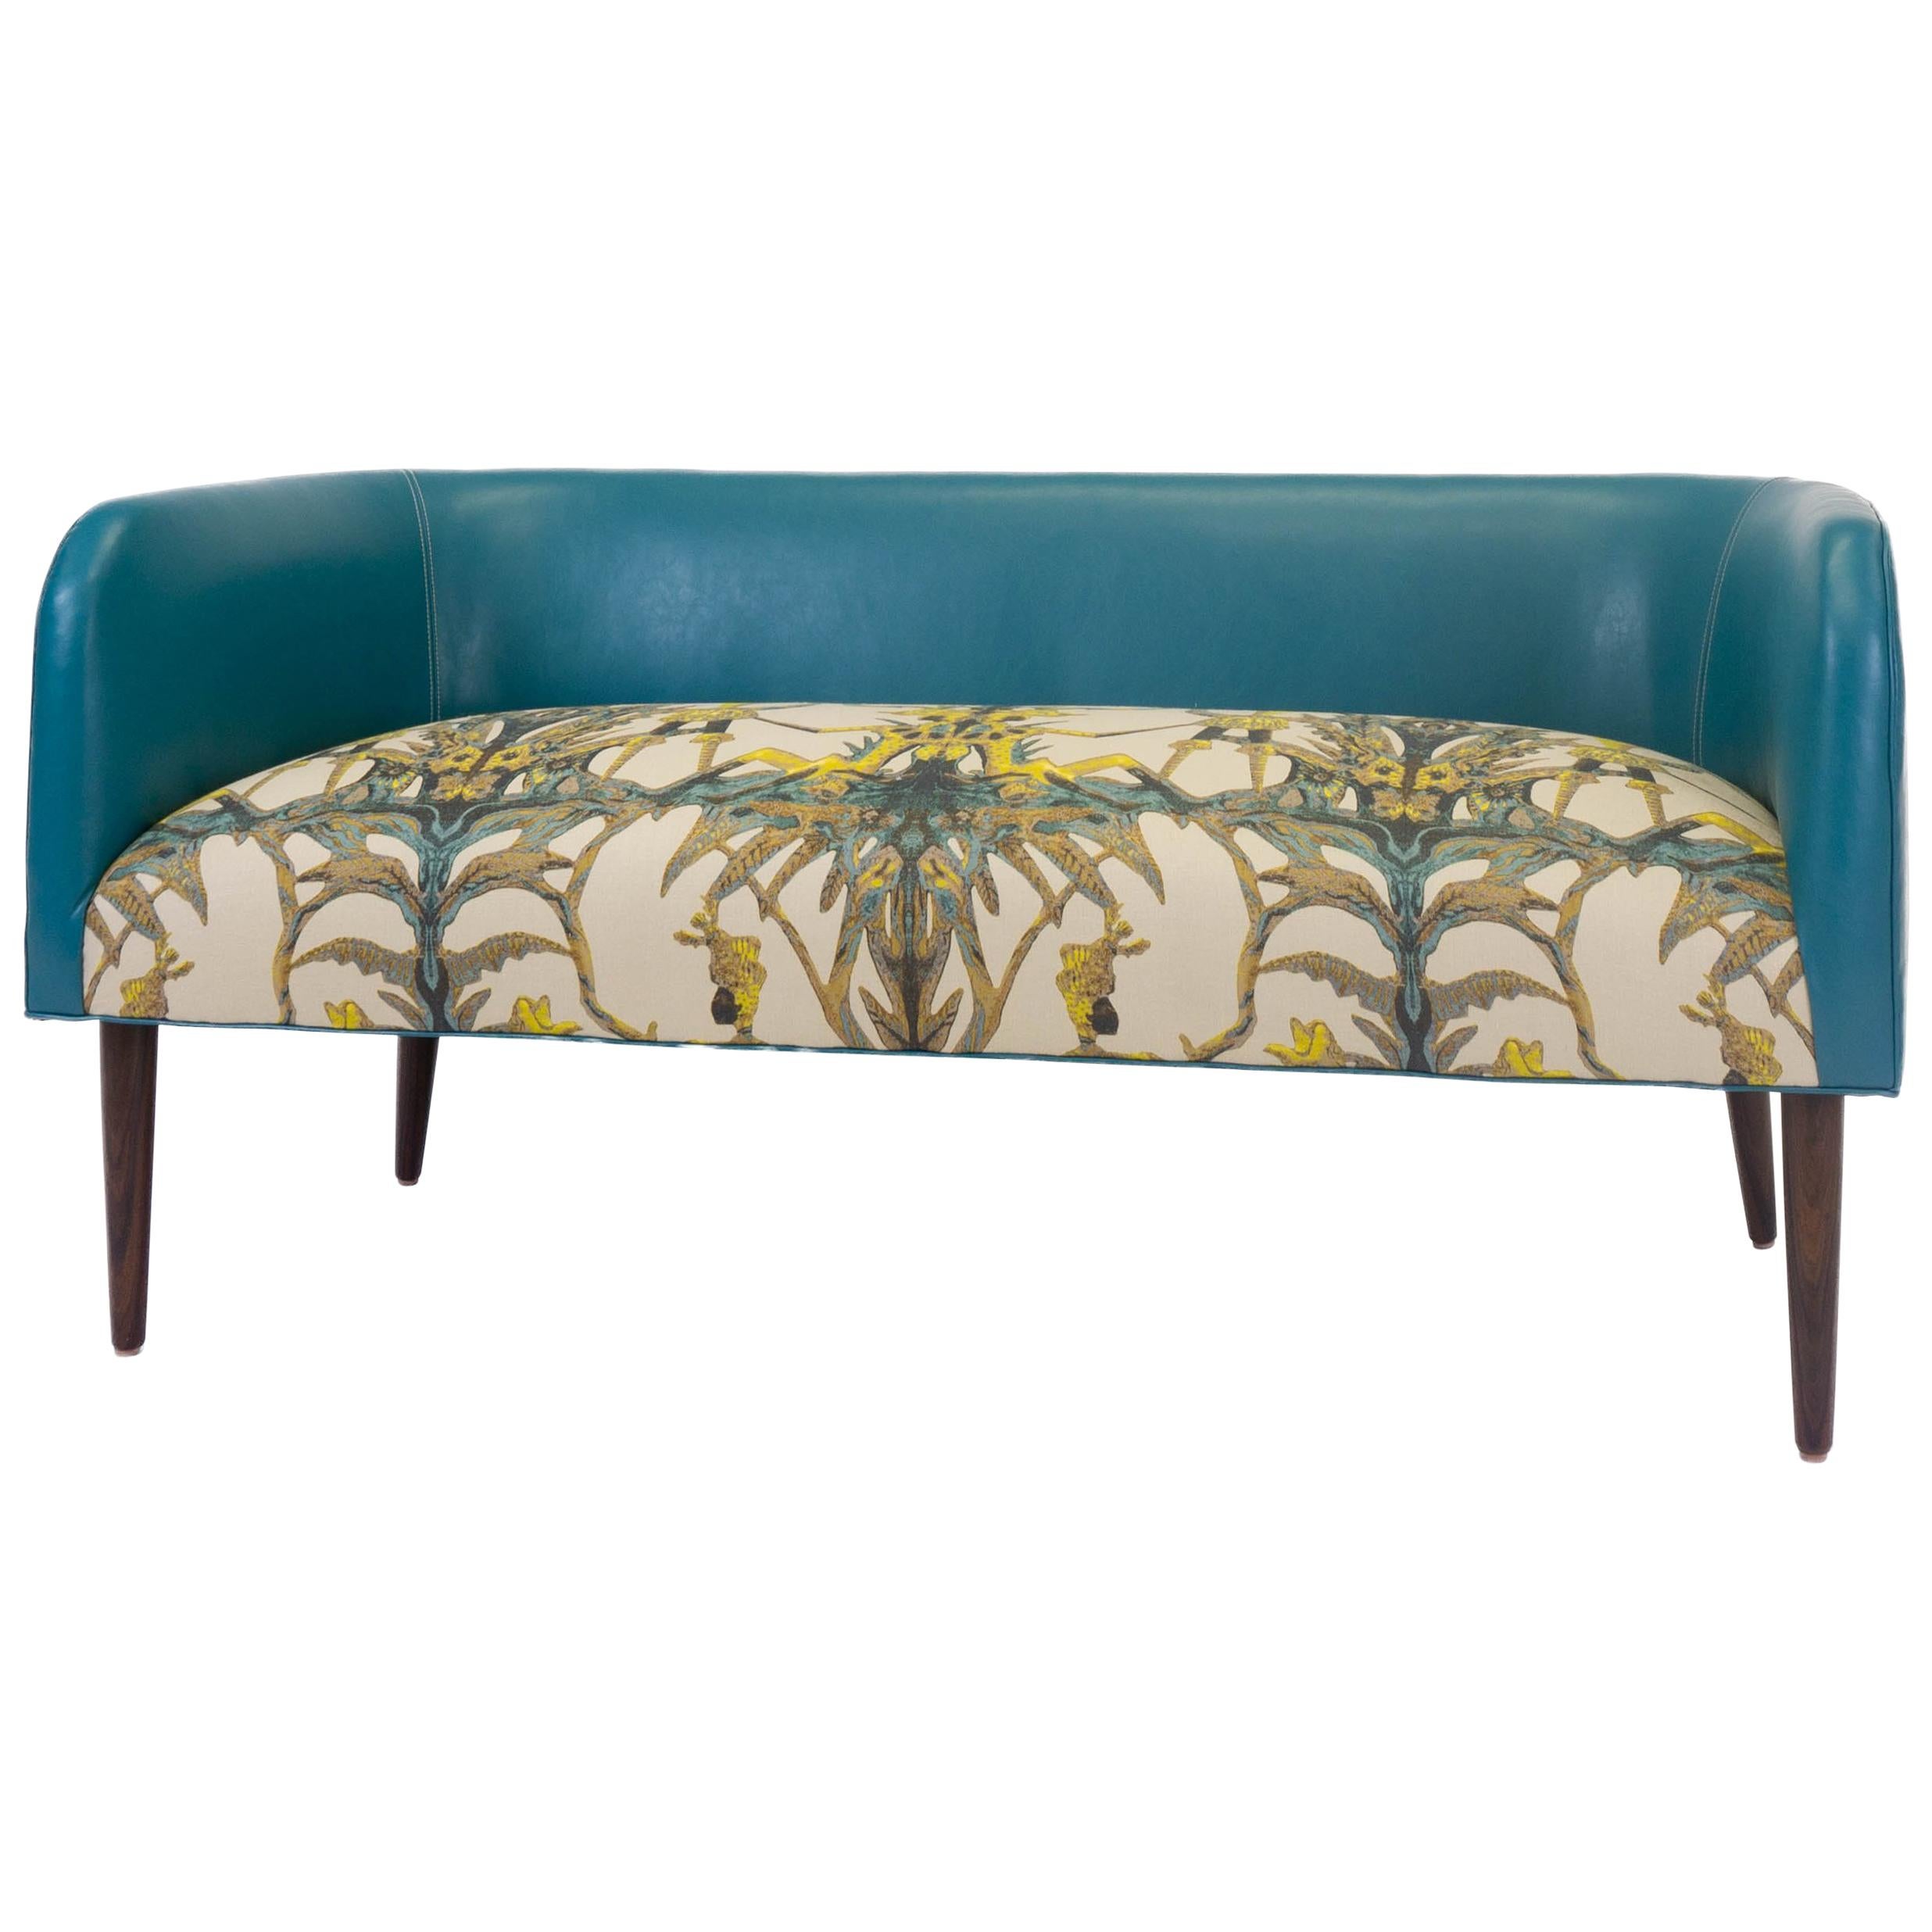 Petite banquette/bench made of solid hard maple is inspired by Mid-Century Modern design. The tight seat bench made with a high density cushion, sitting atop 8-way hand tied springs, features colorful combinations of fabrics. The back is upholstered